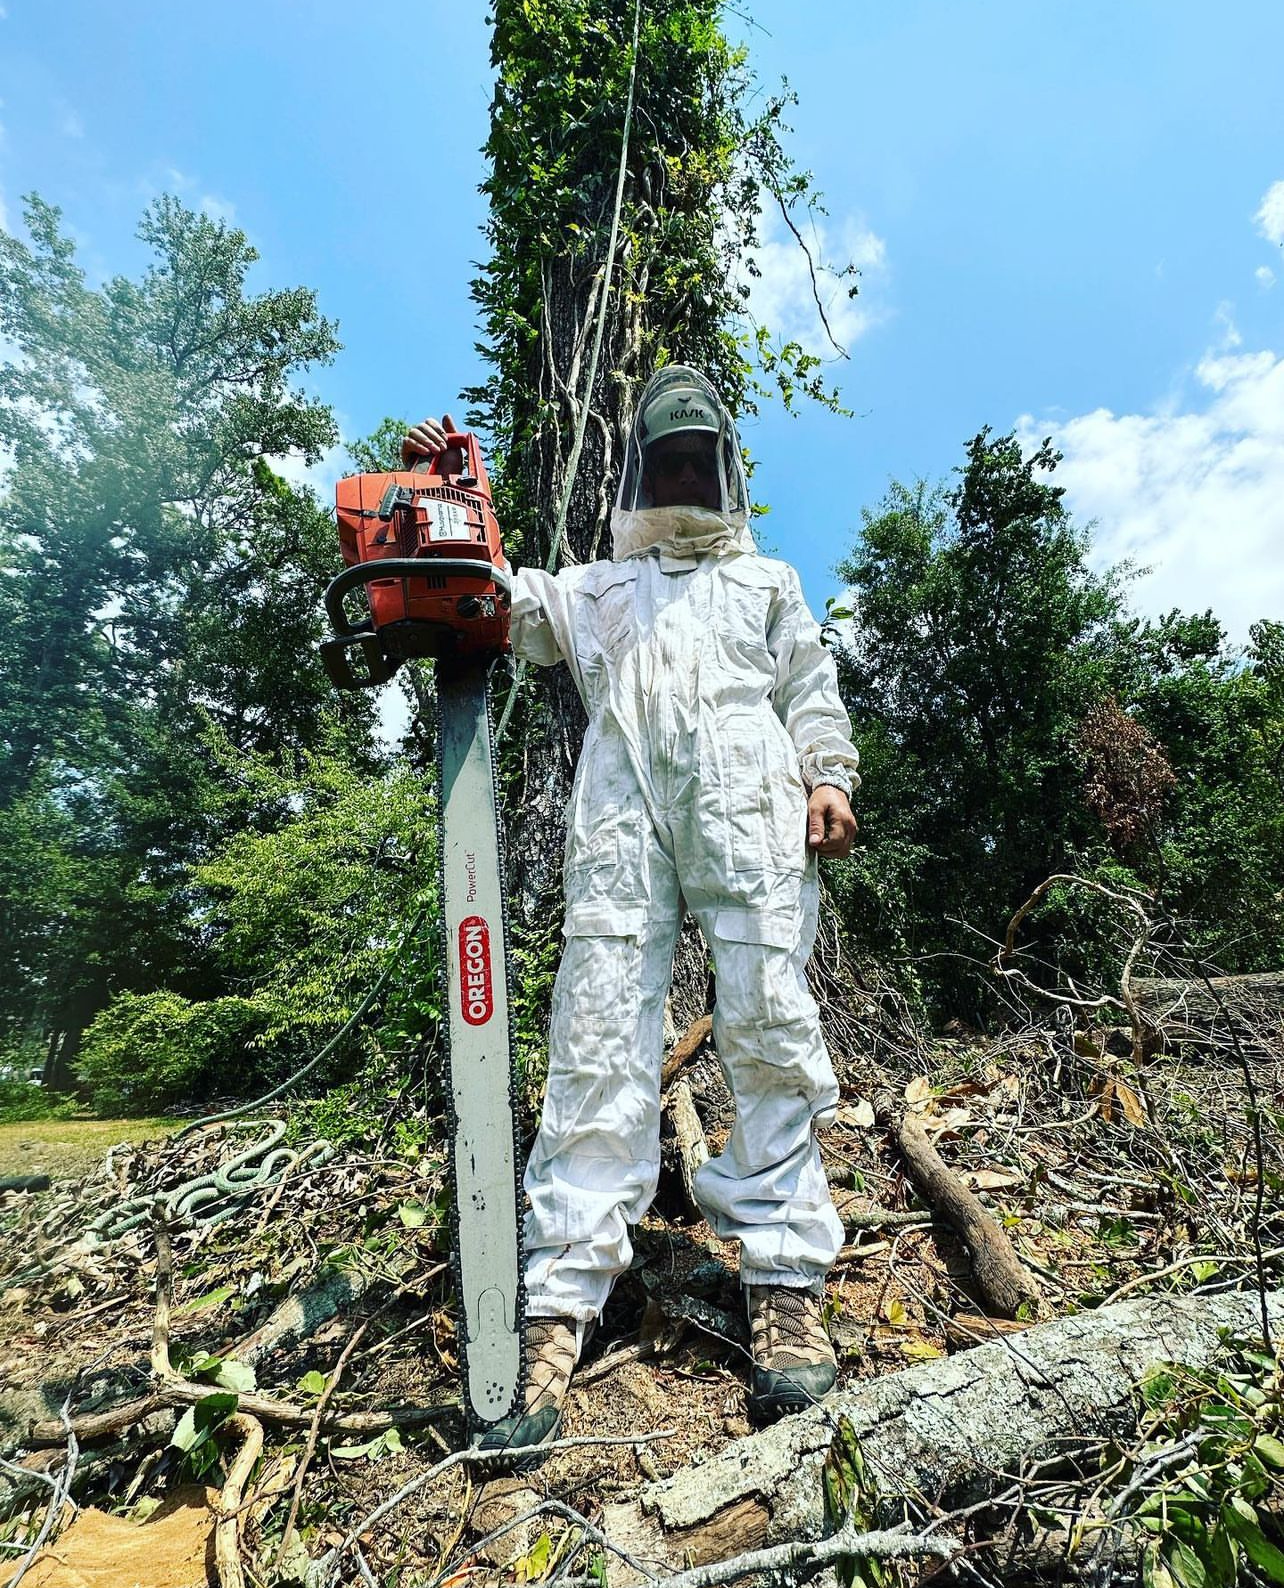 arborist posing for a photo holding a chainsaw